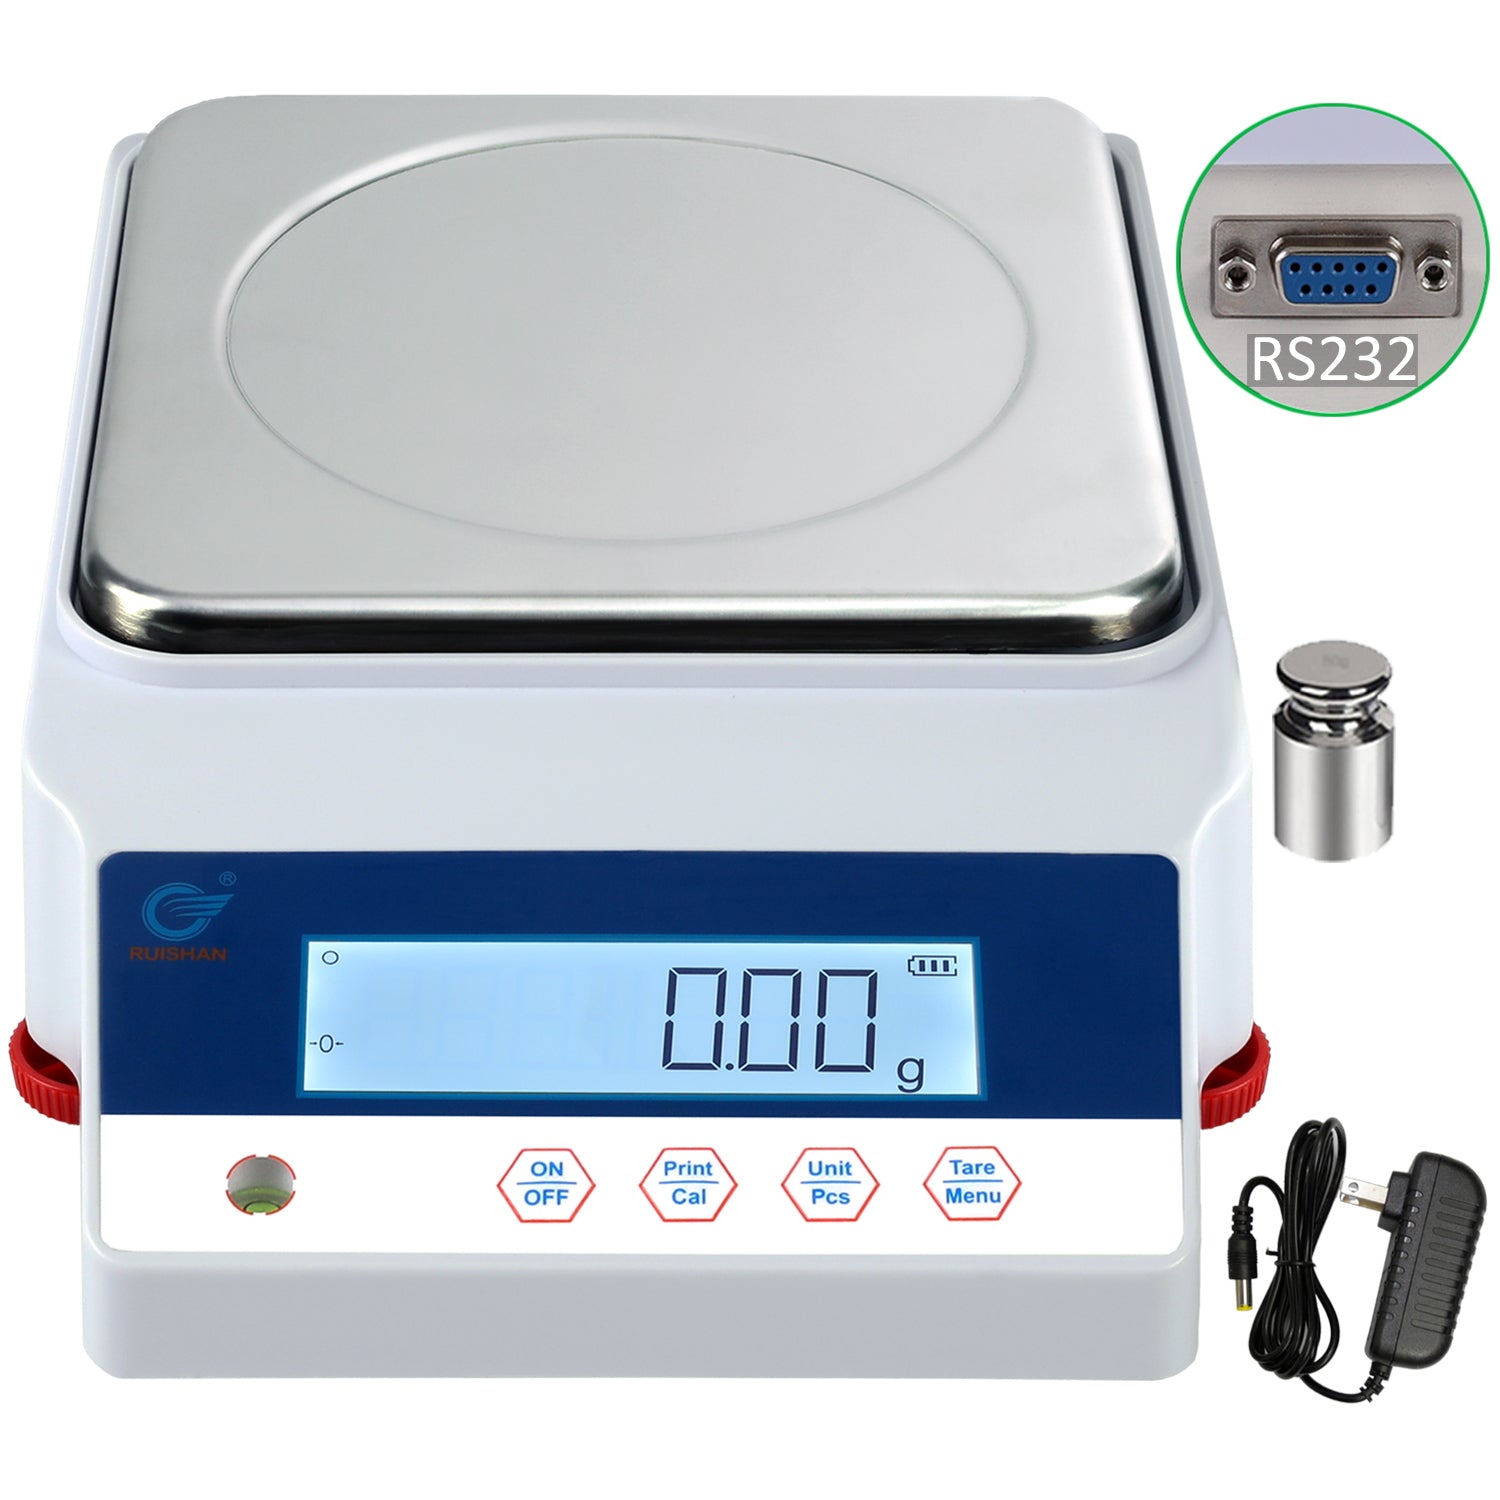 5Kg/ 0.01g Lab Analytical Balance Digital Precision Weighing Scale